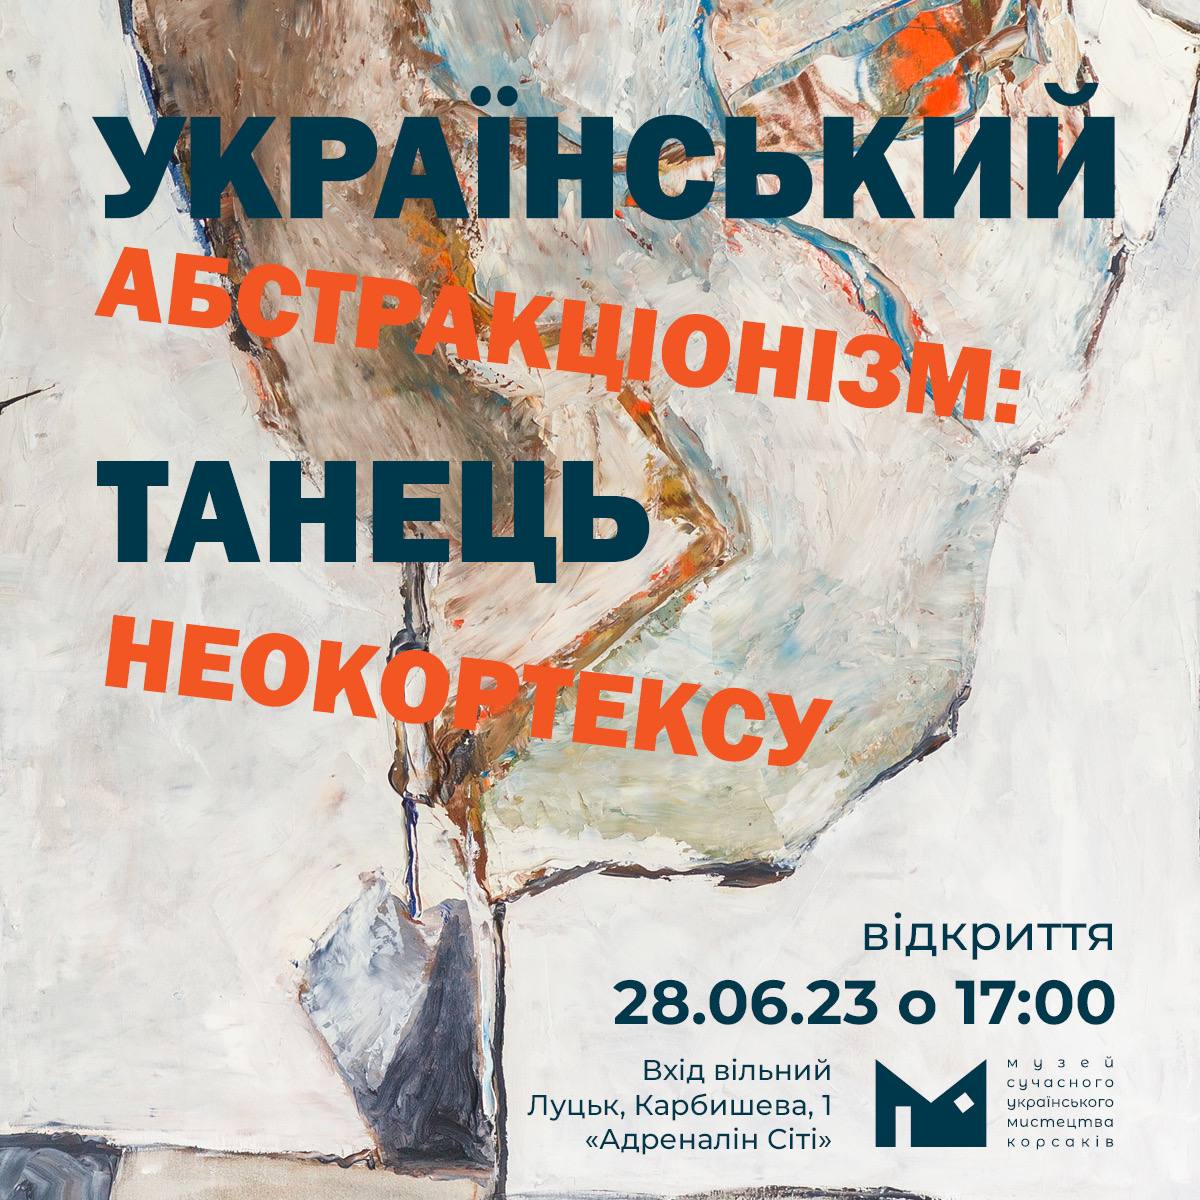 On June 28, at 5:00 p.m., the Korsaks` Museum will host the opening of the exhibition “Ukrainian Abstractionism: Dance of the Neocortex”